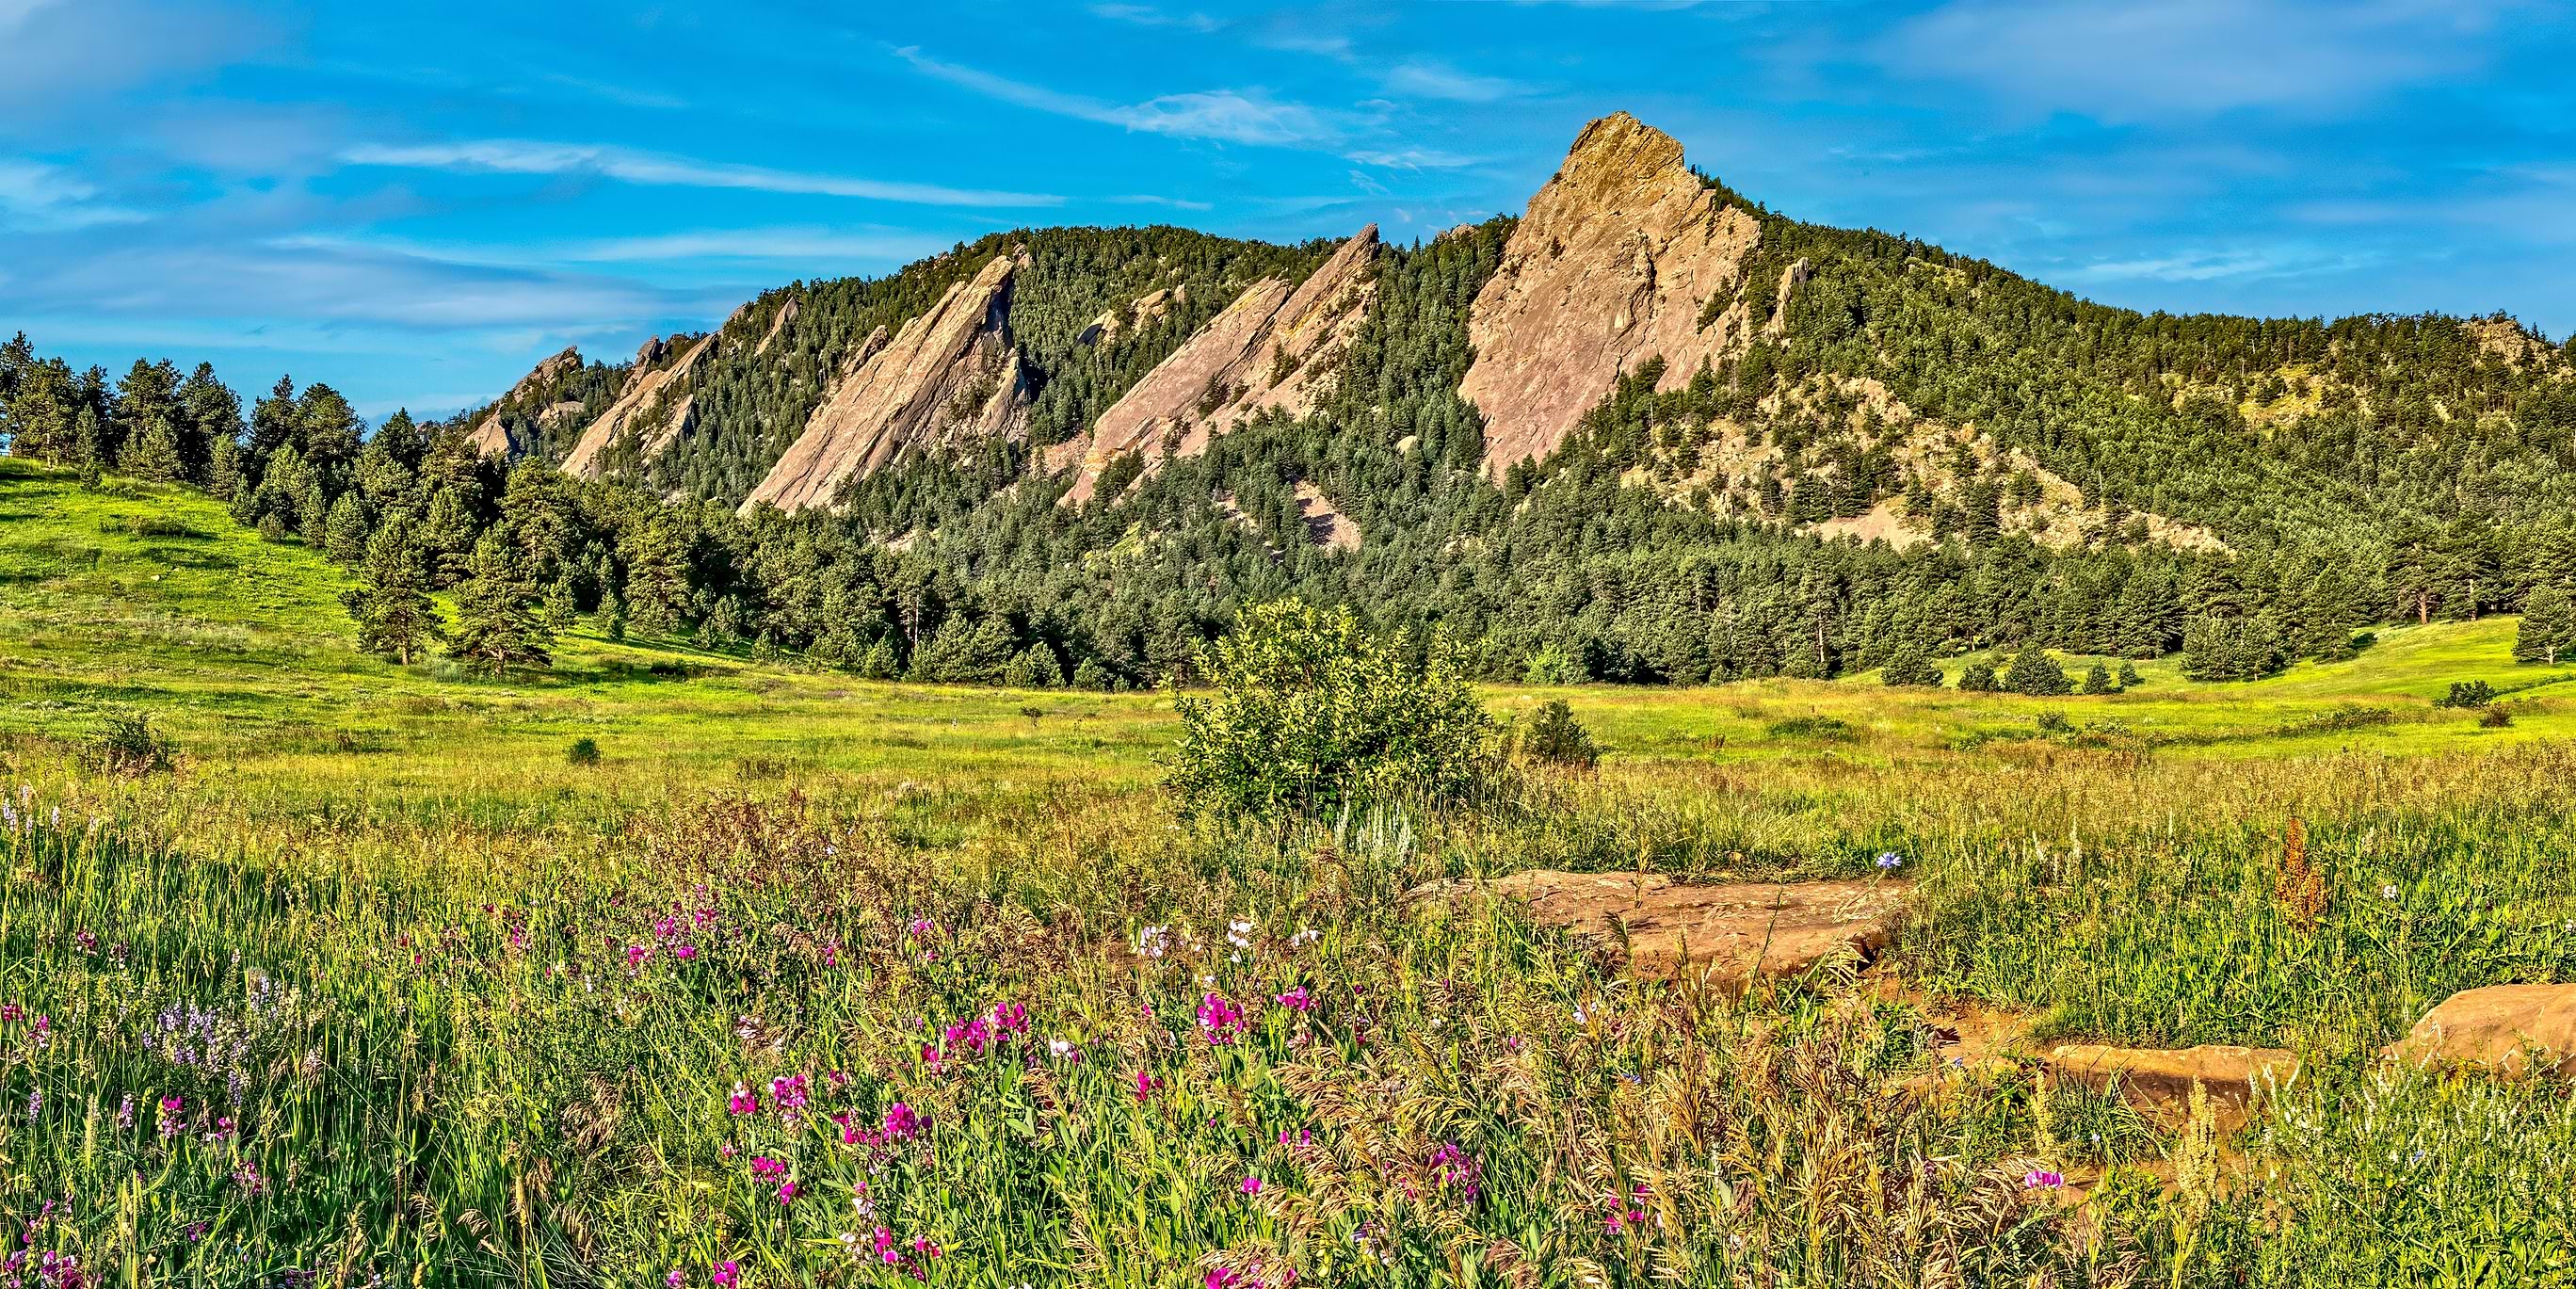 Flatirons as viewed from Chautauqua in Boulder Colorado